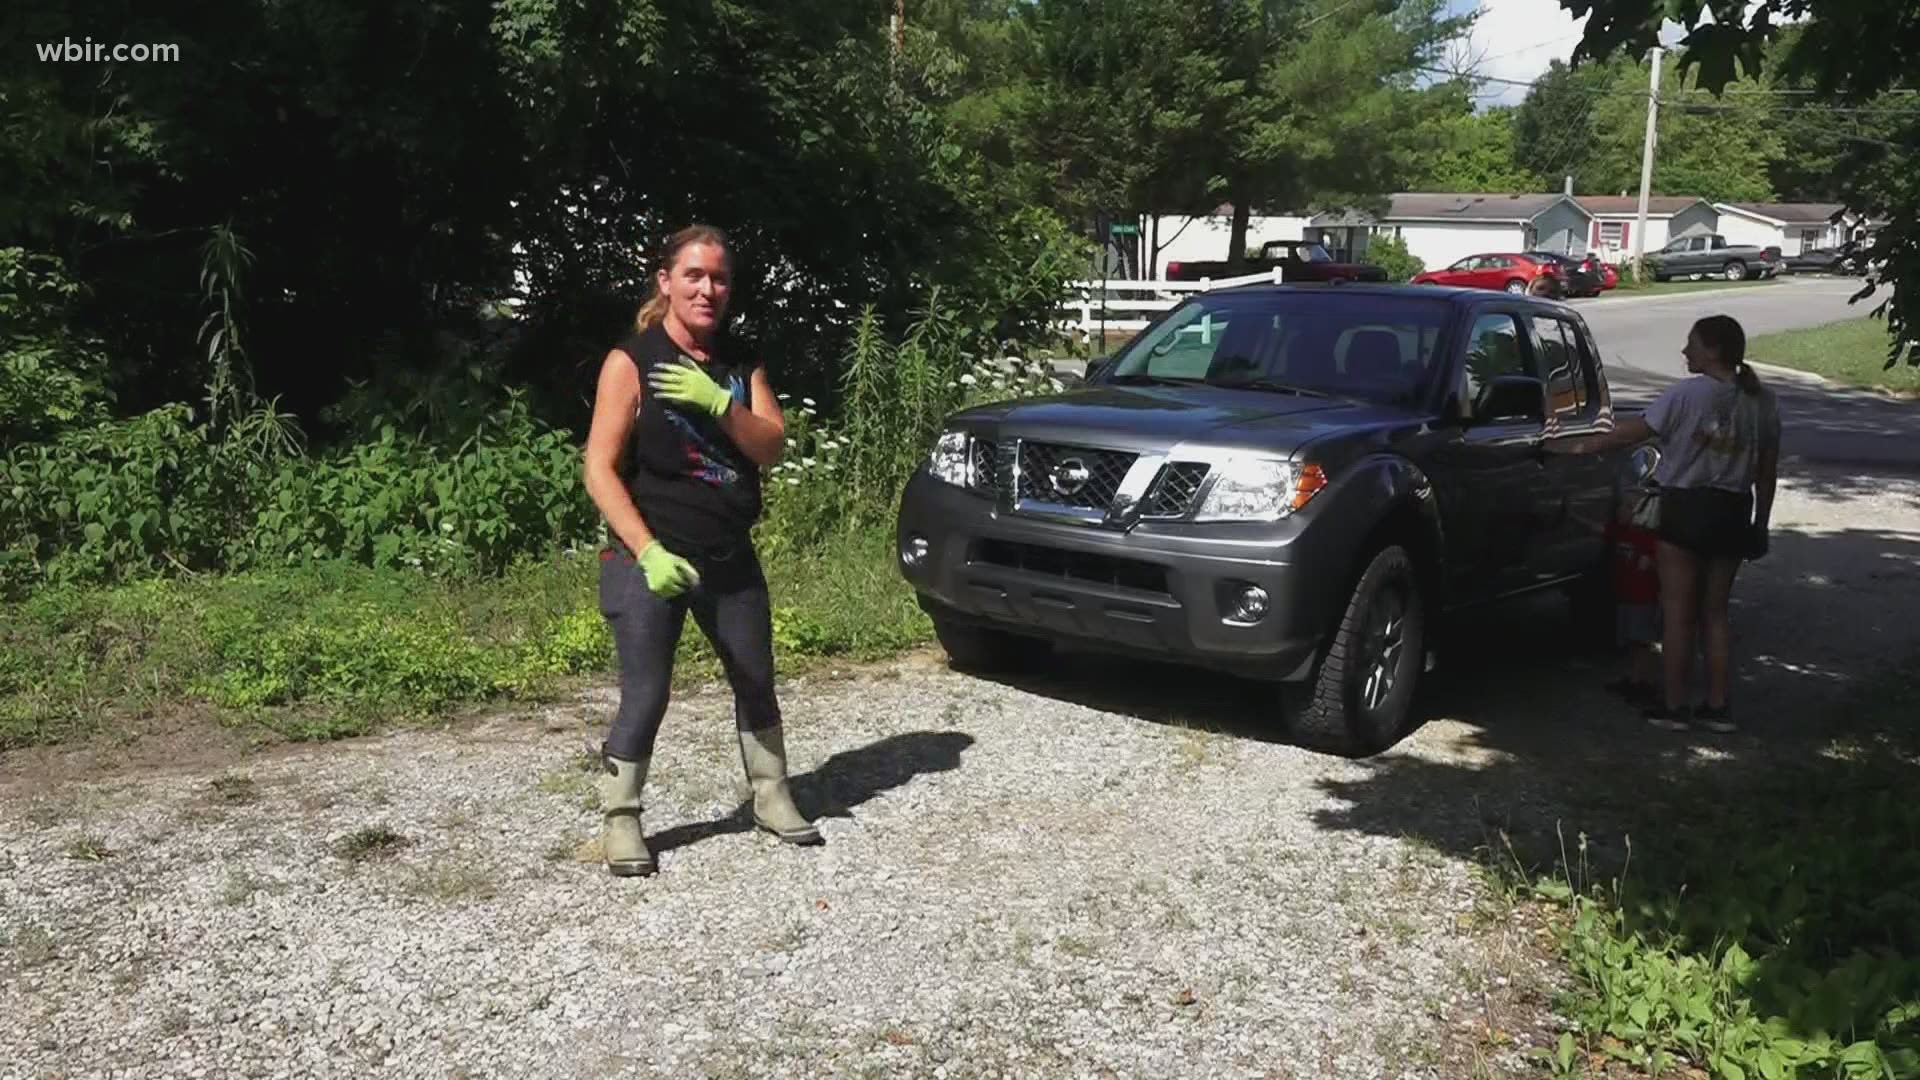 An anonymous donor gifted Brandy Brogdon a Nissan truck so she can haul more litter and bigger trash items away from the side of the road.